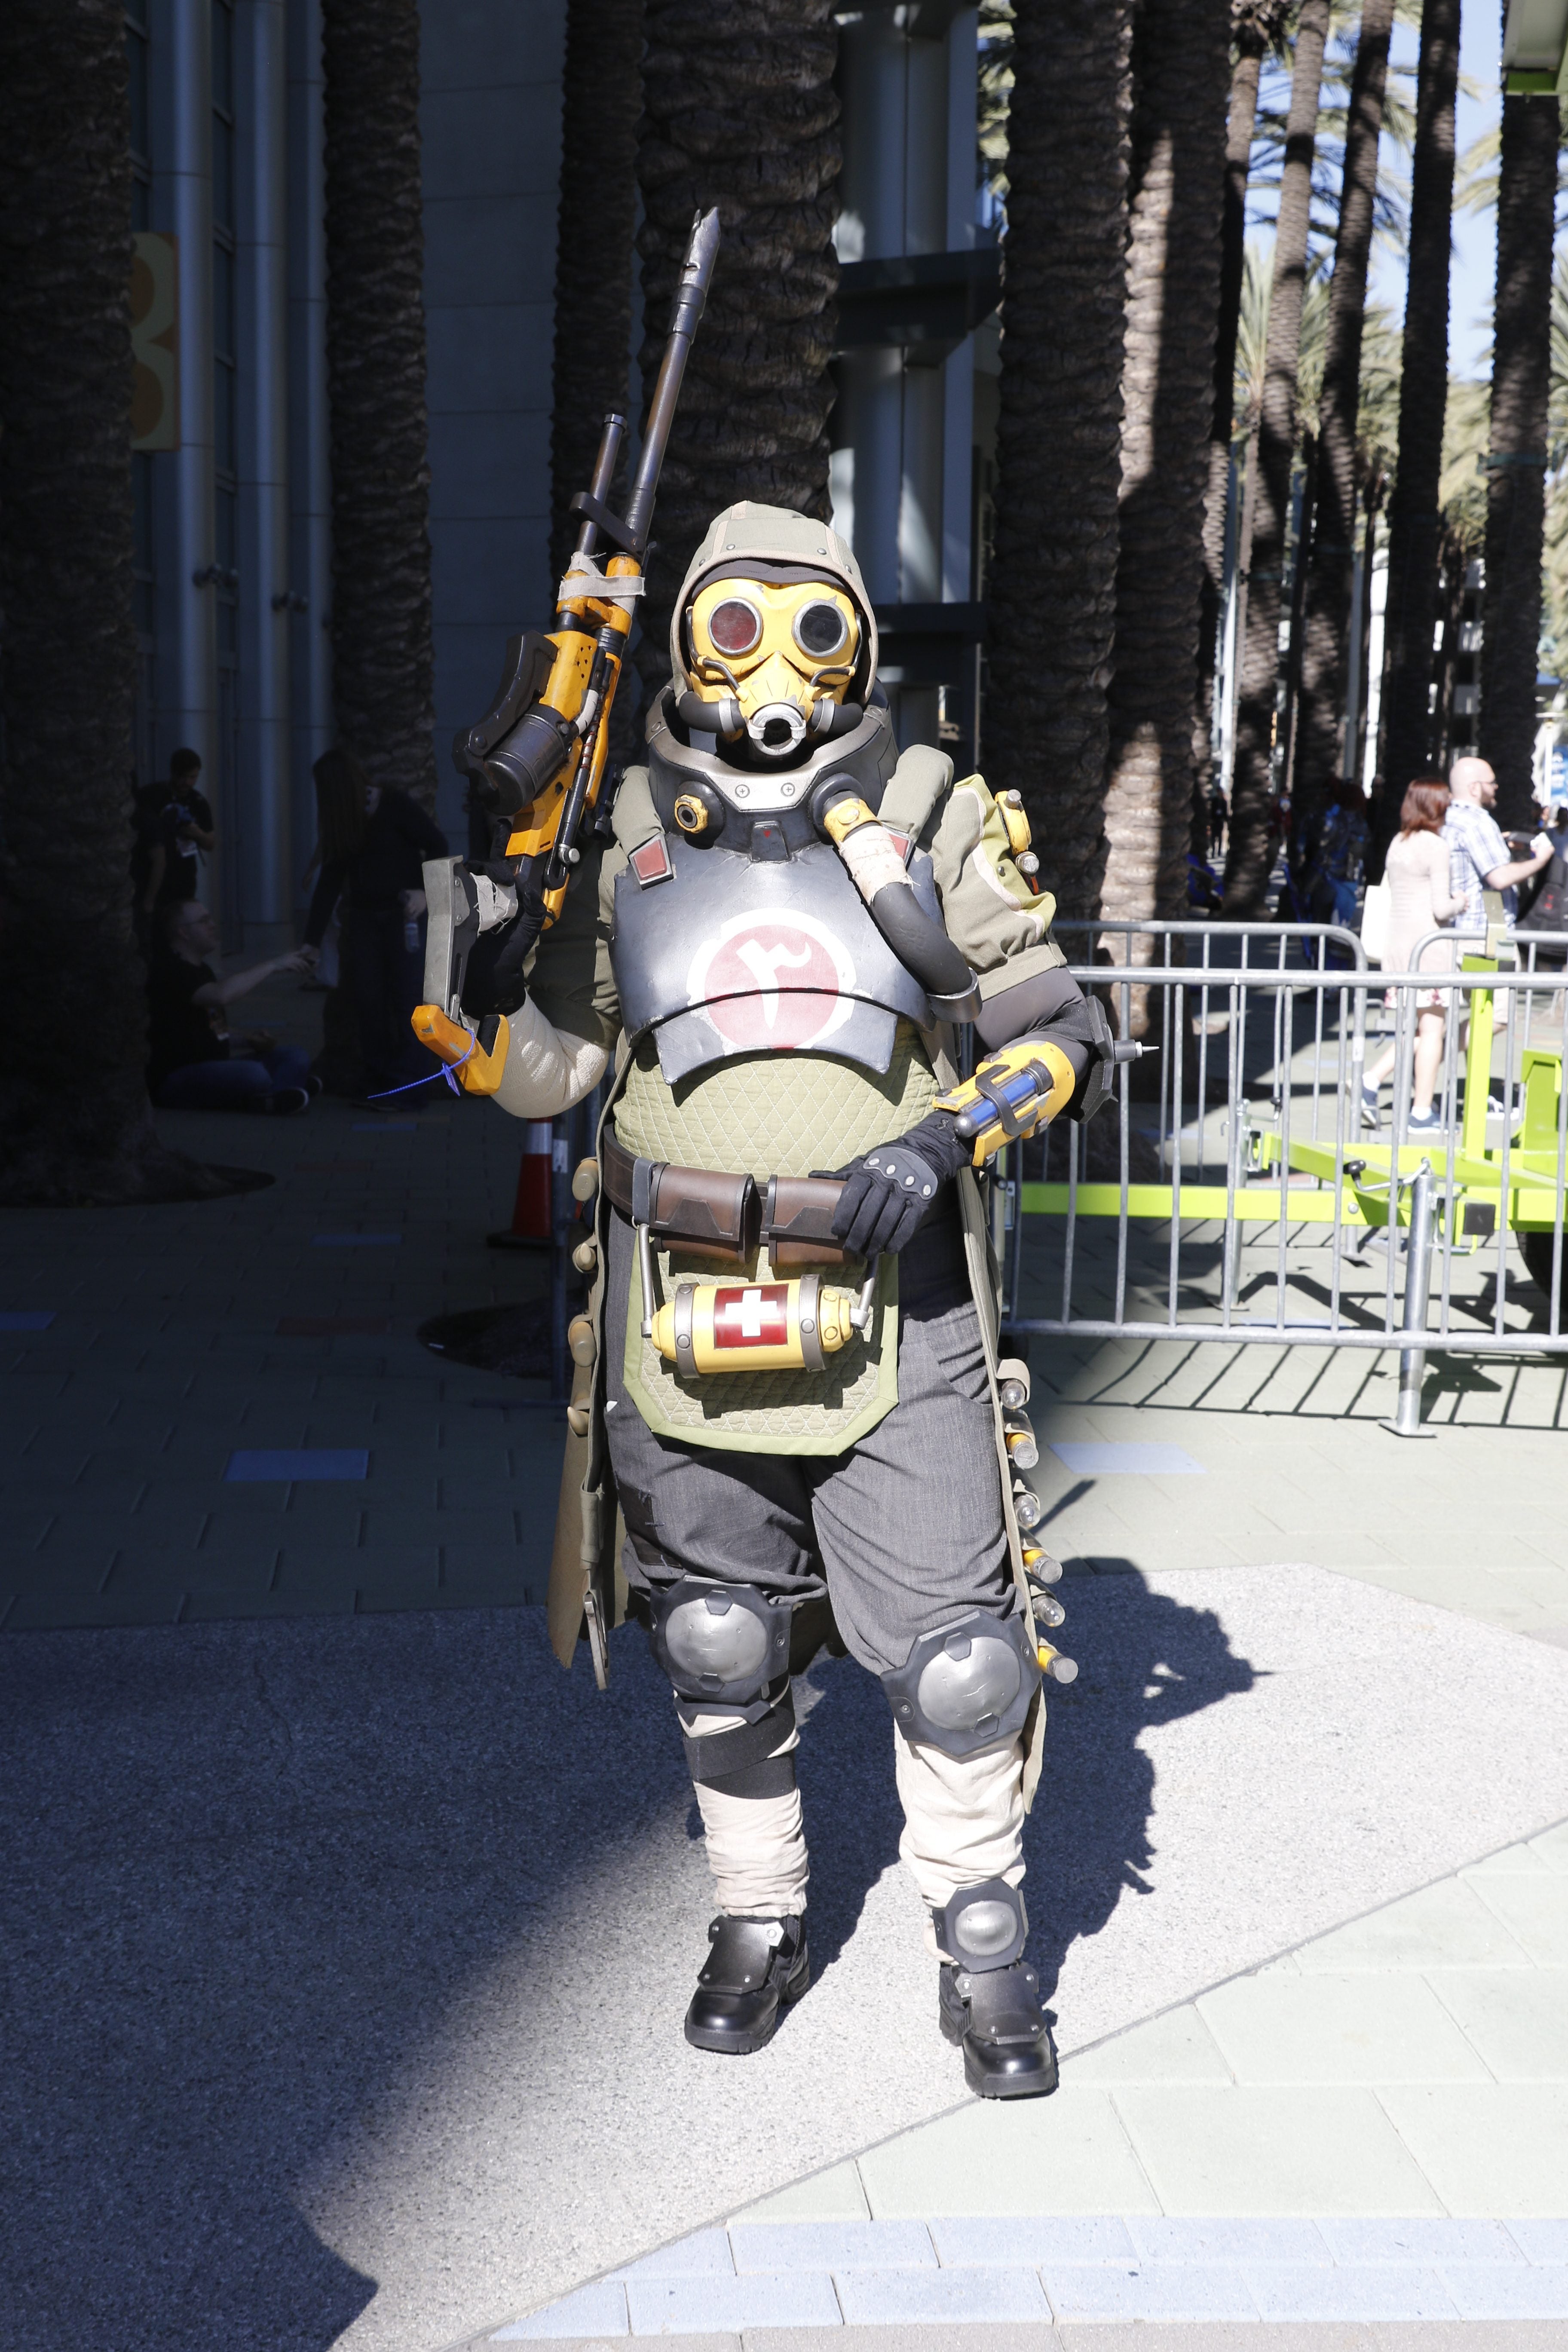 A person wearing an alien suit holding a rifle standing on a street